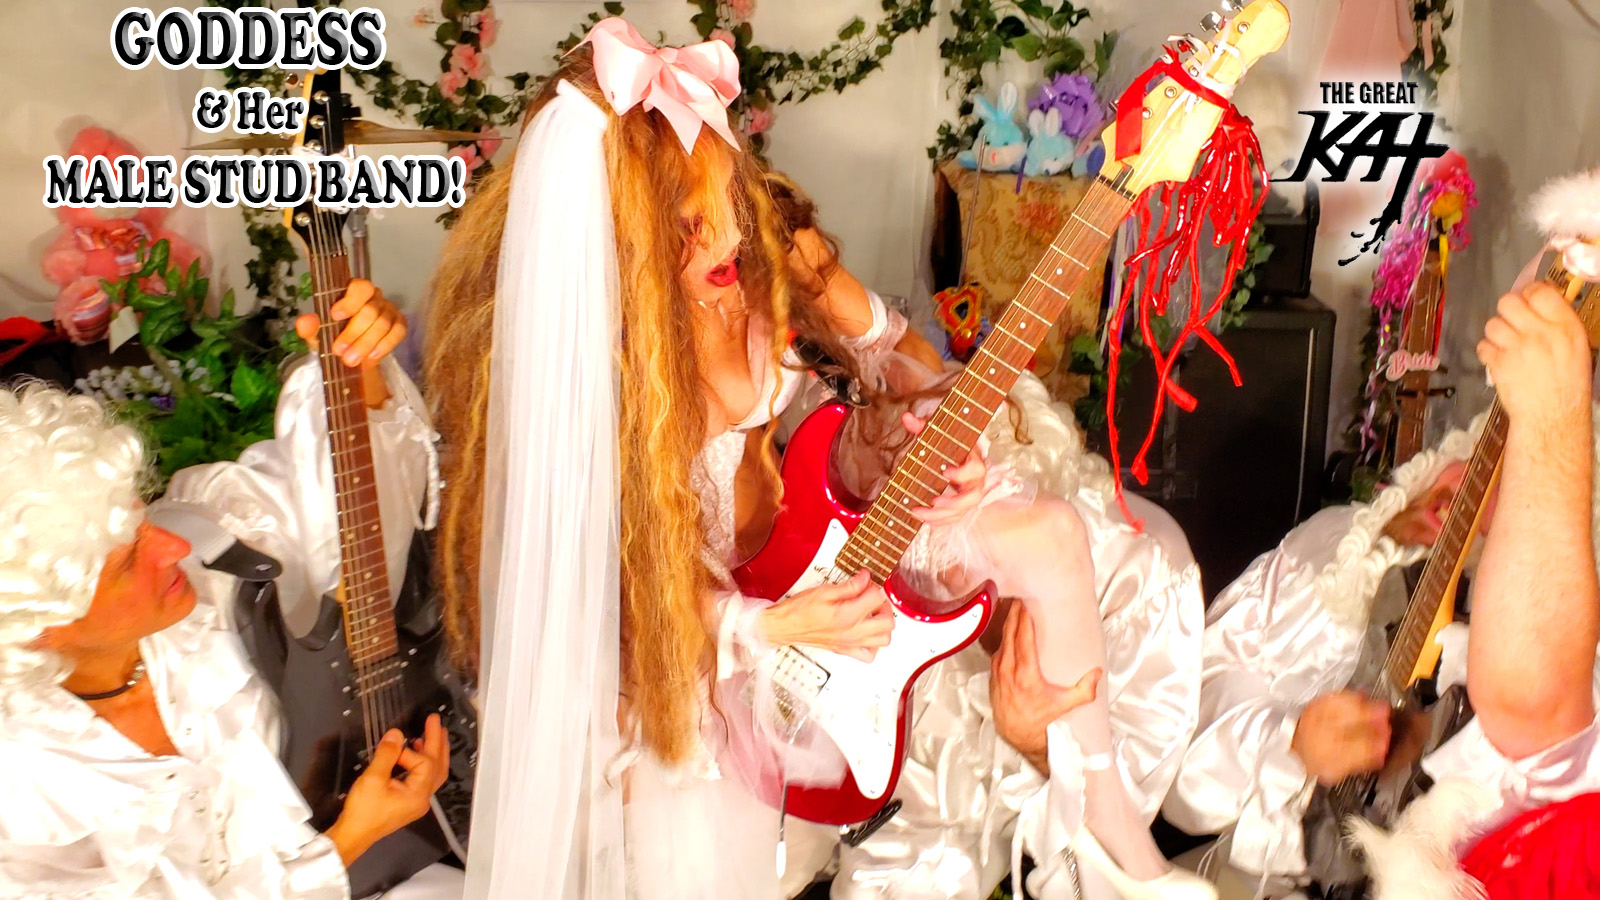 GODDESS & HER MALE-STUD BAND! MOZART'S THE MARRIAGE OF FIGARO OVERTURE by THE GREAT KAT!